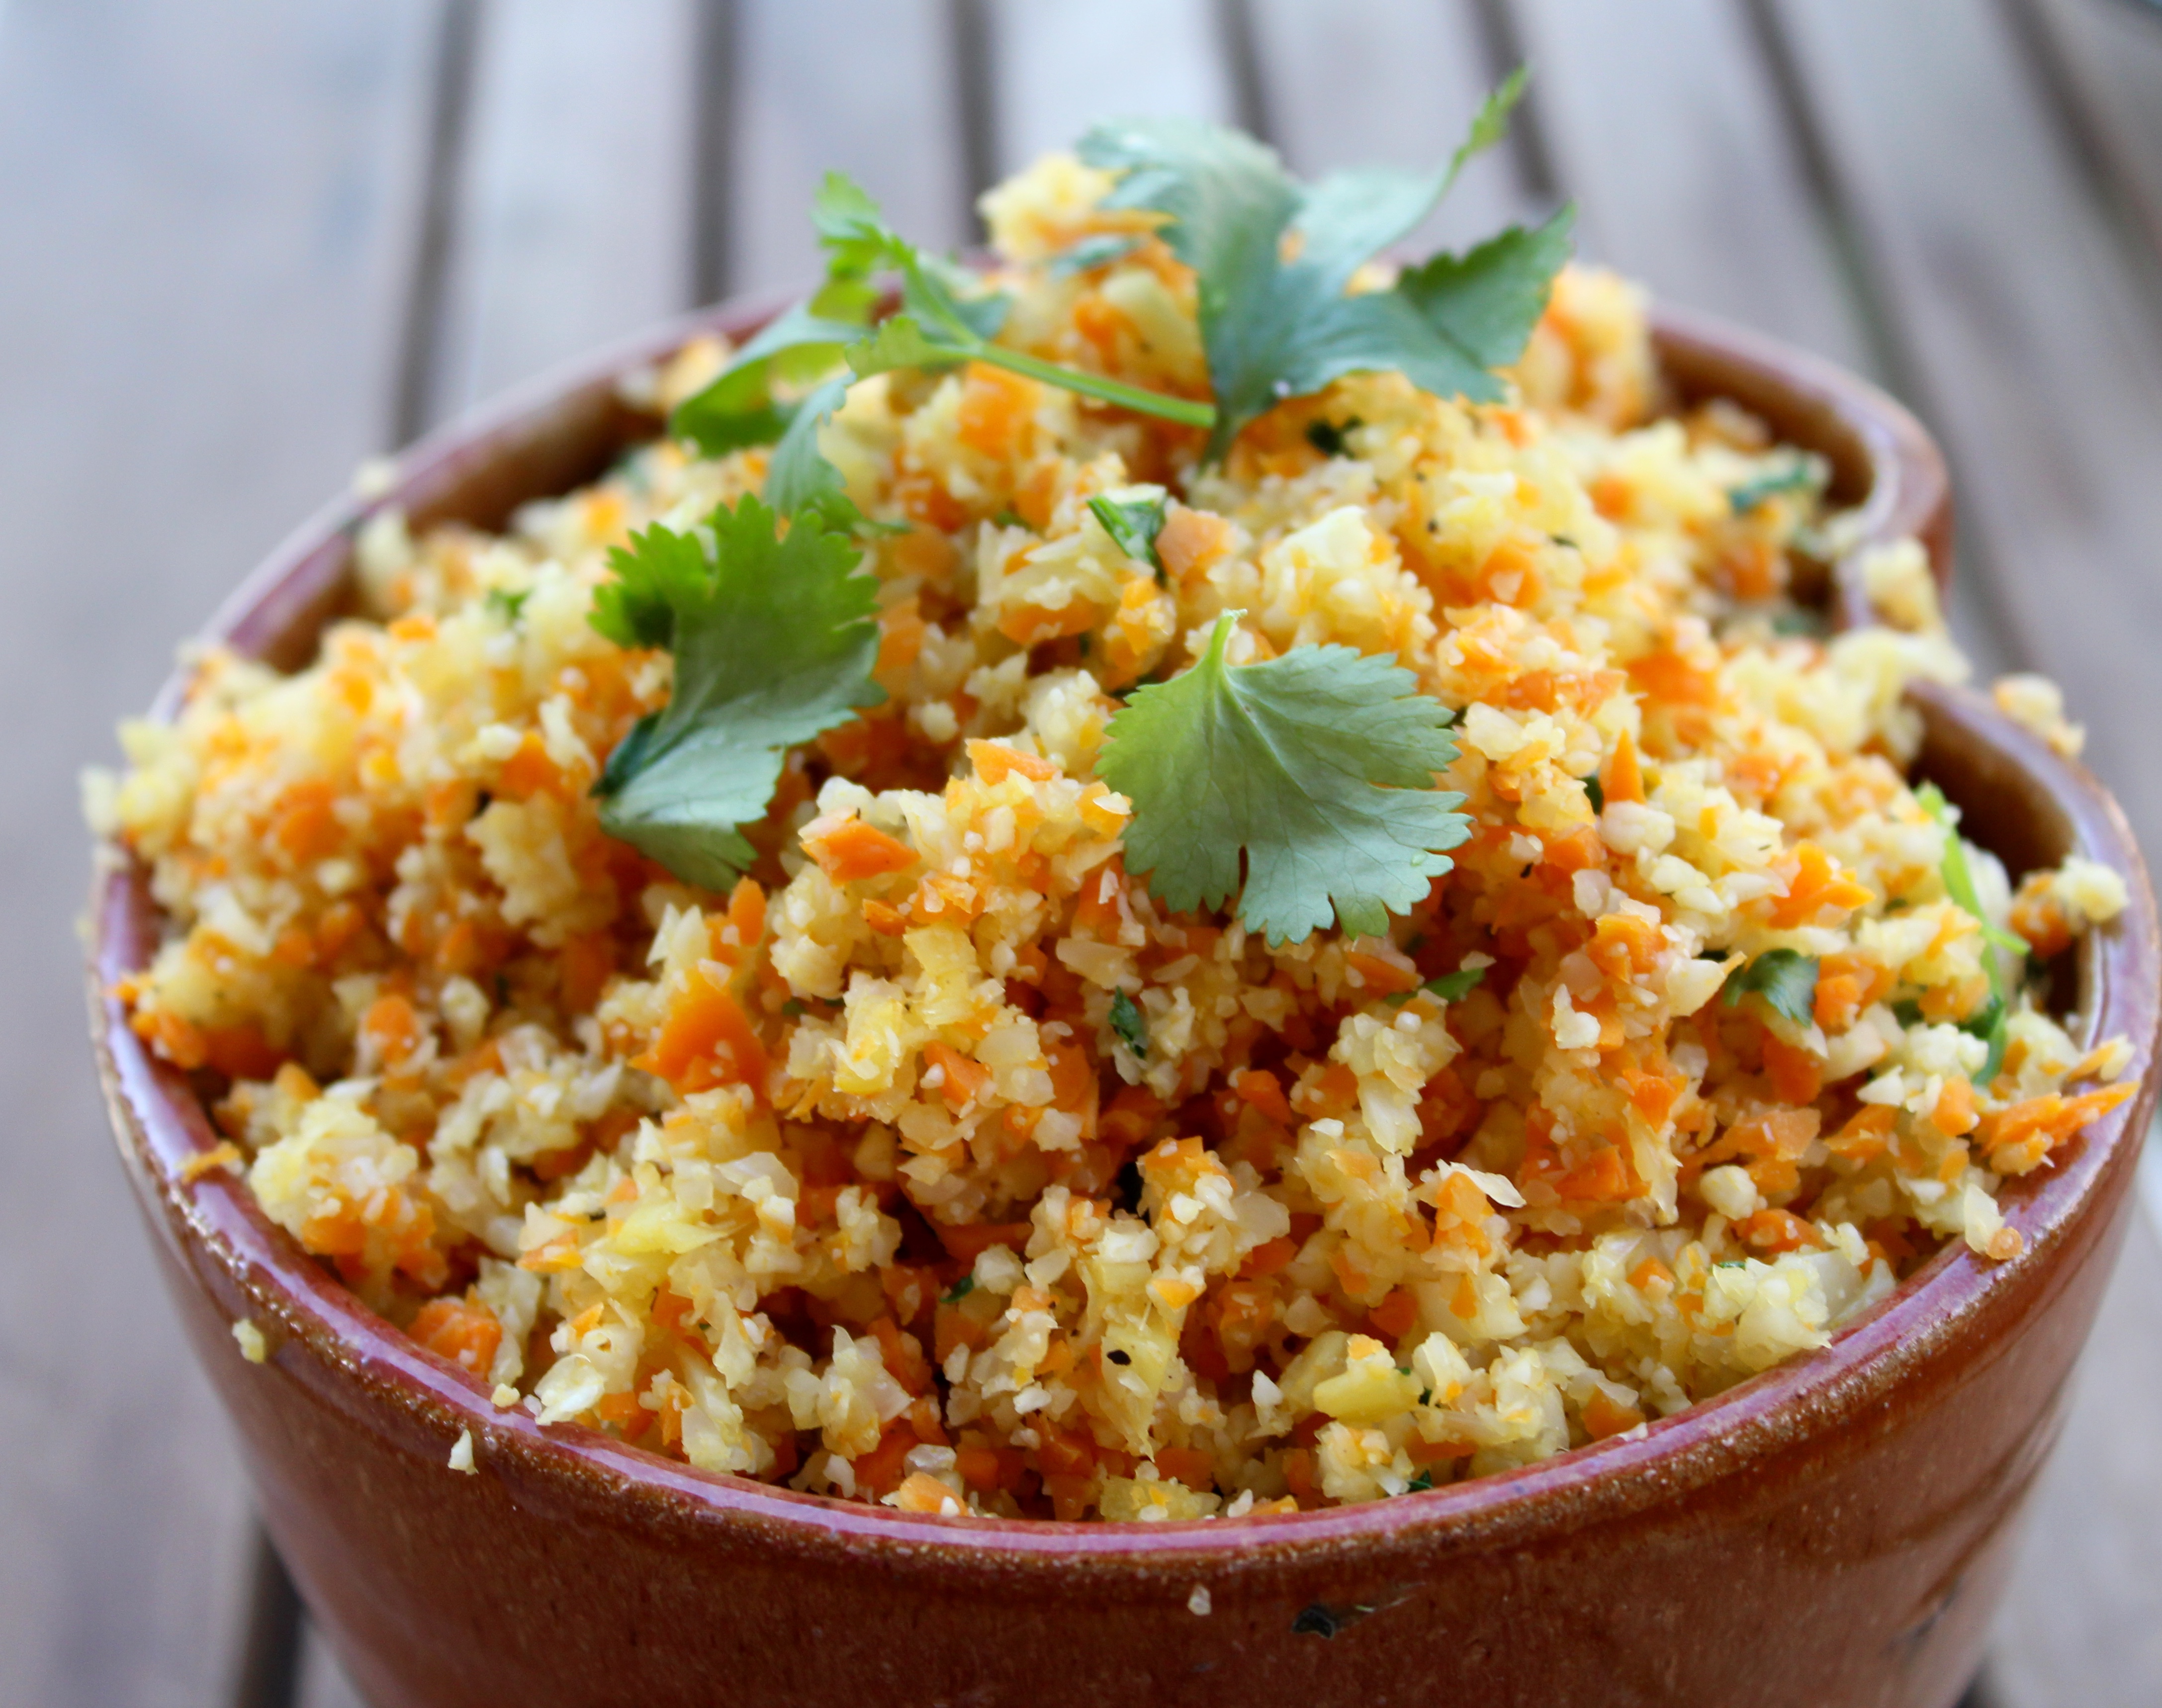 Ginger Carrot and Cilantro Cauliflower Rice. So easy and healthy!